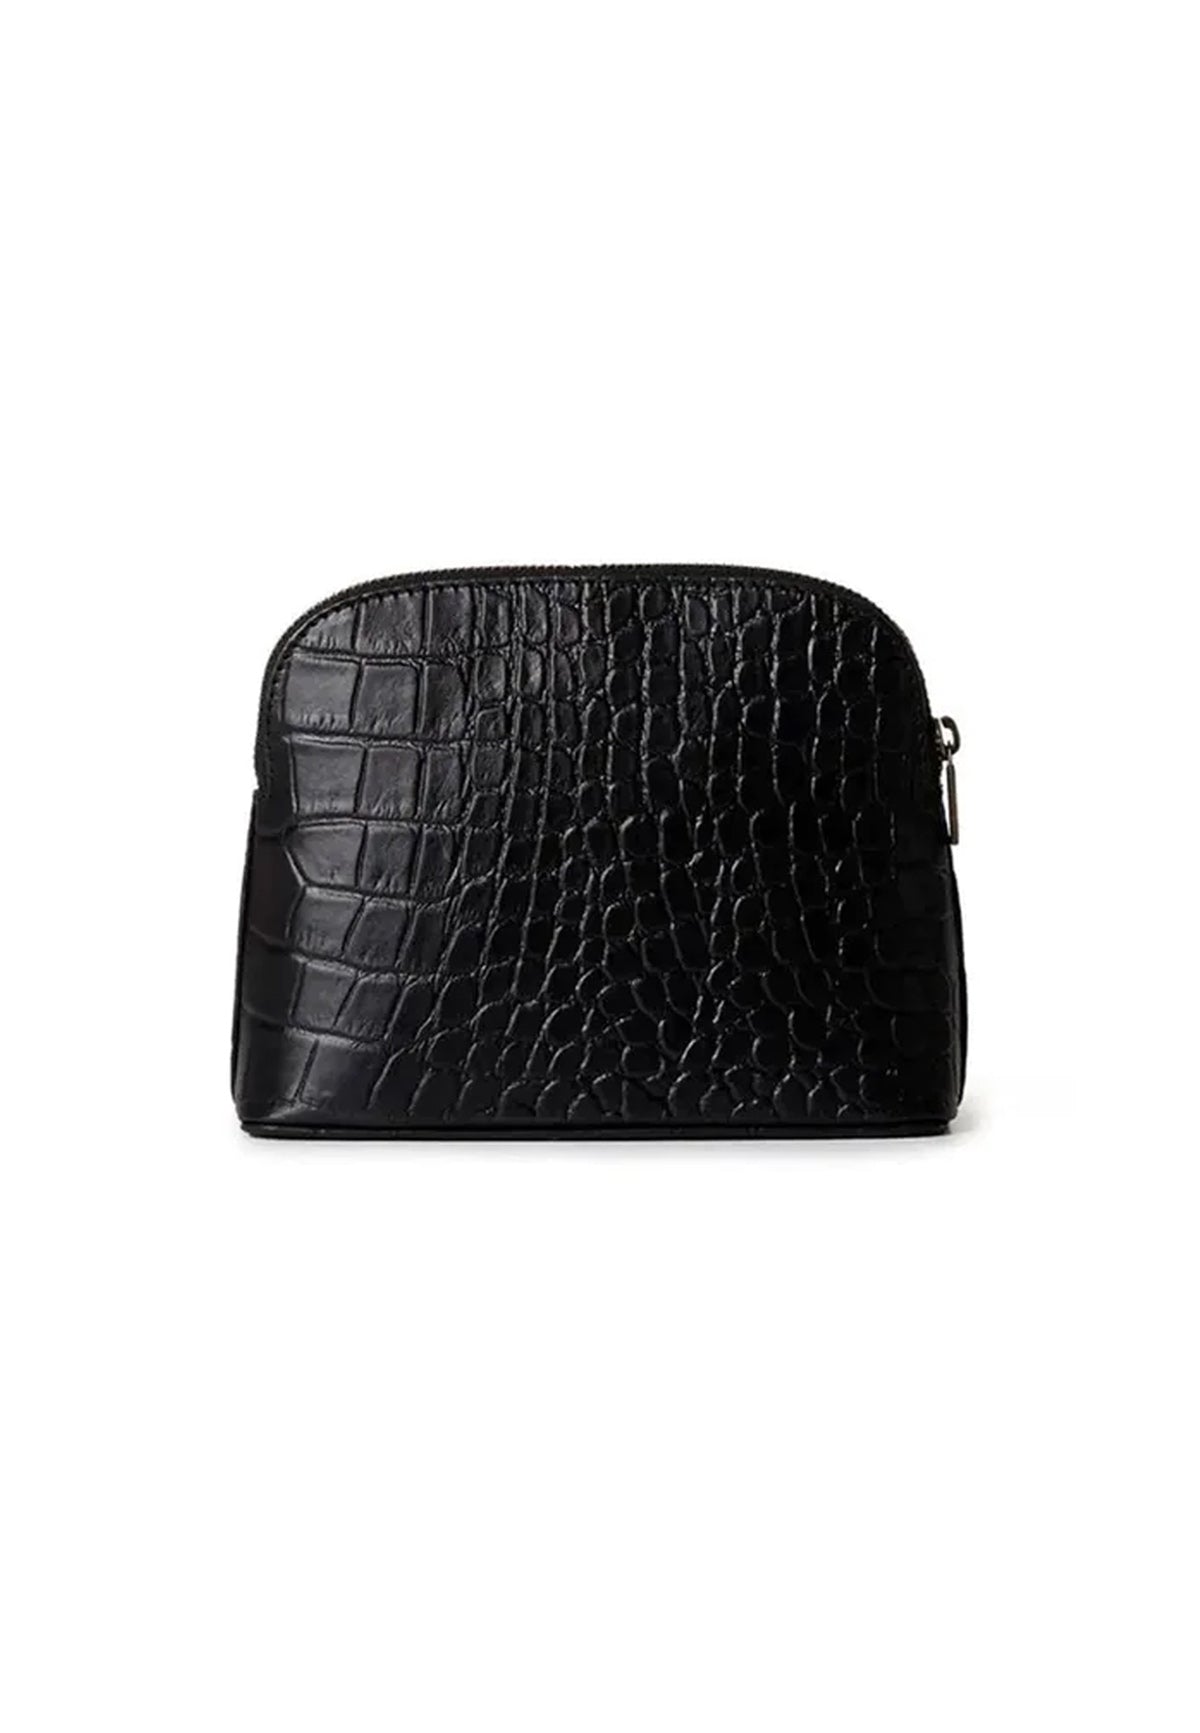 COSMETIC POUCH BLACK CROCO CLASSIC LEATHER